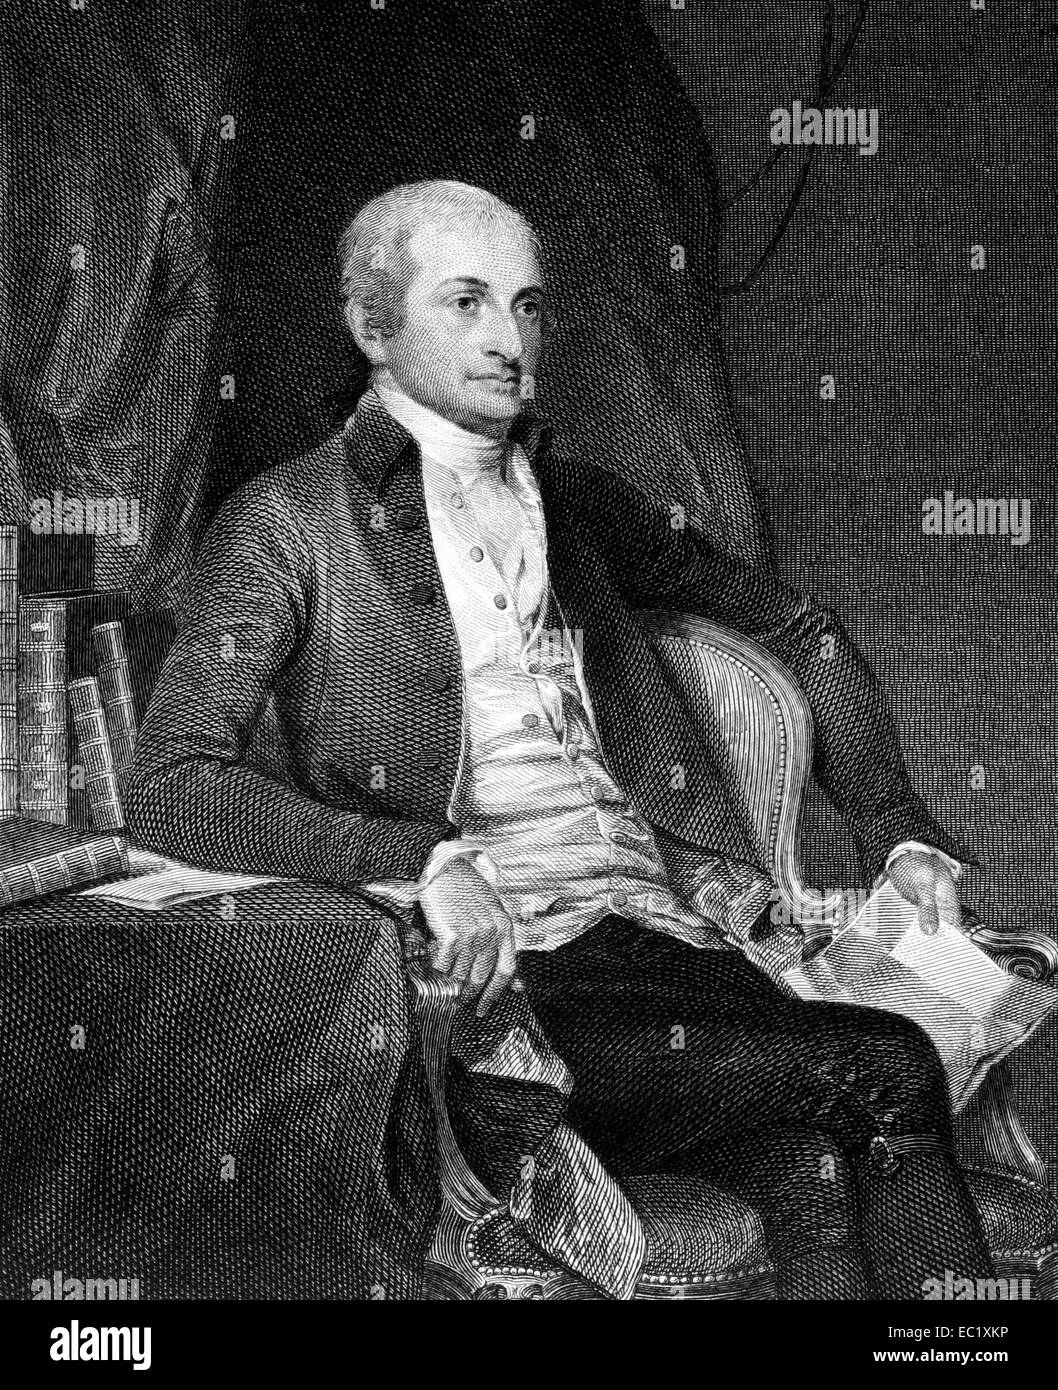 John Jay (1745-1829) on engraving from 1835. American statesman, Patriot, diplomat and first Chief Justice of the Supreme Court. Stock Photo